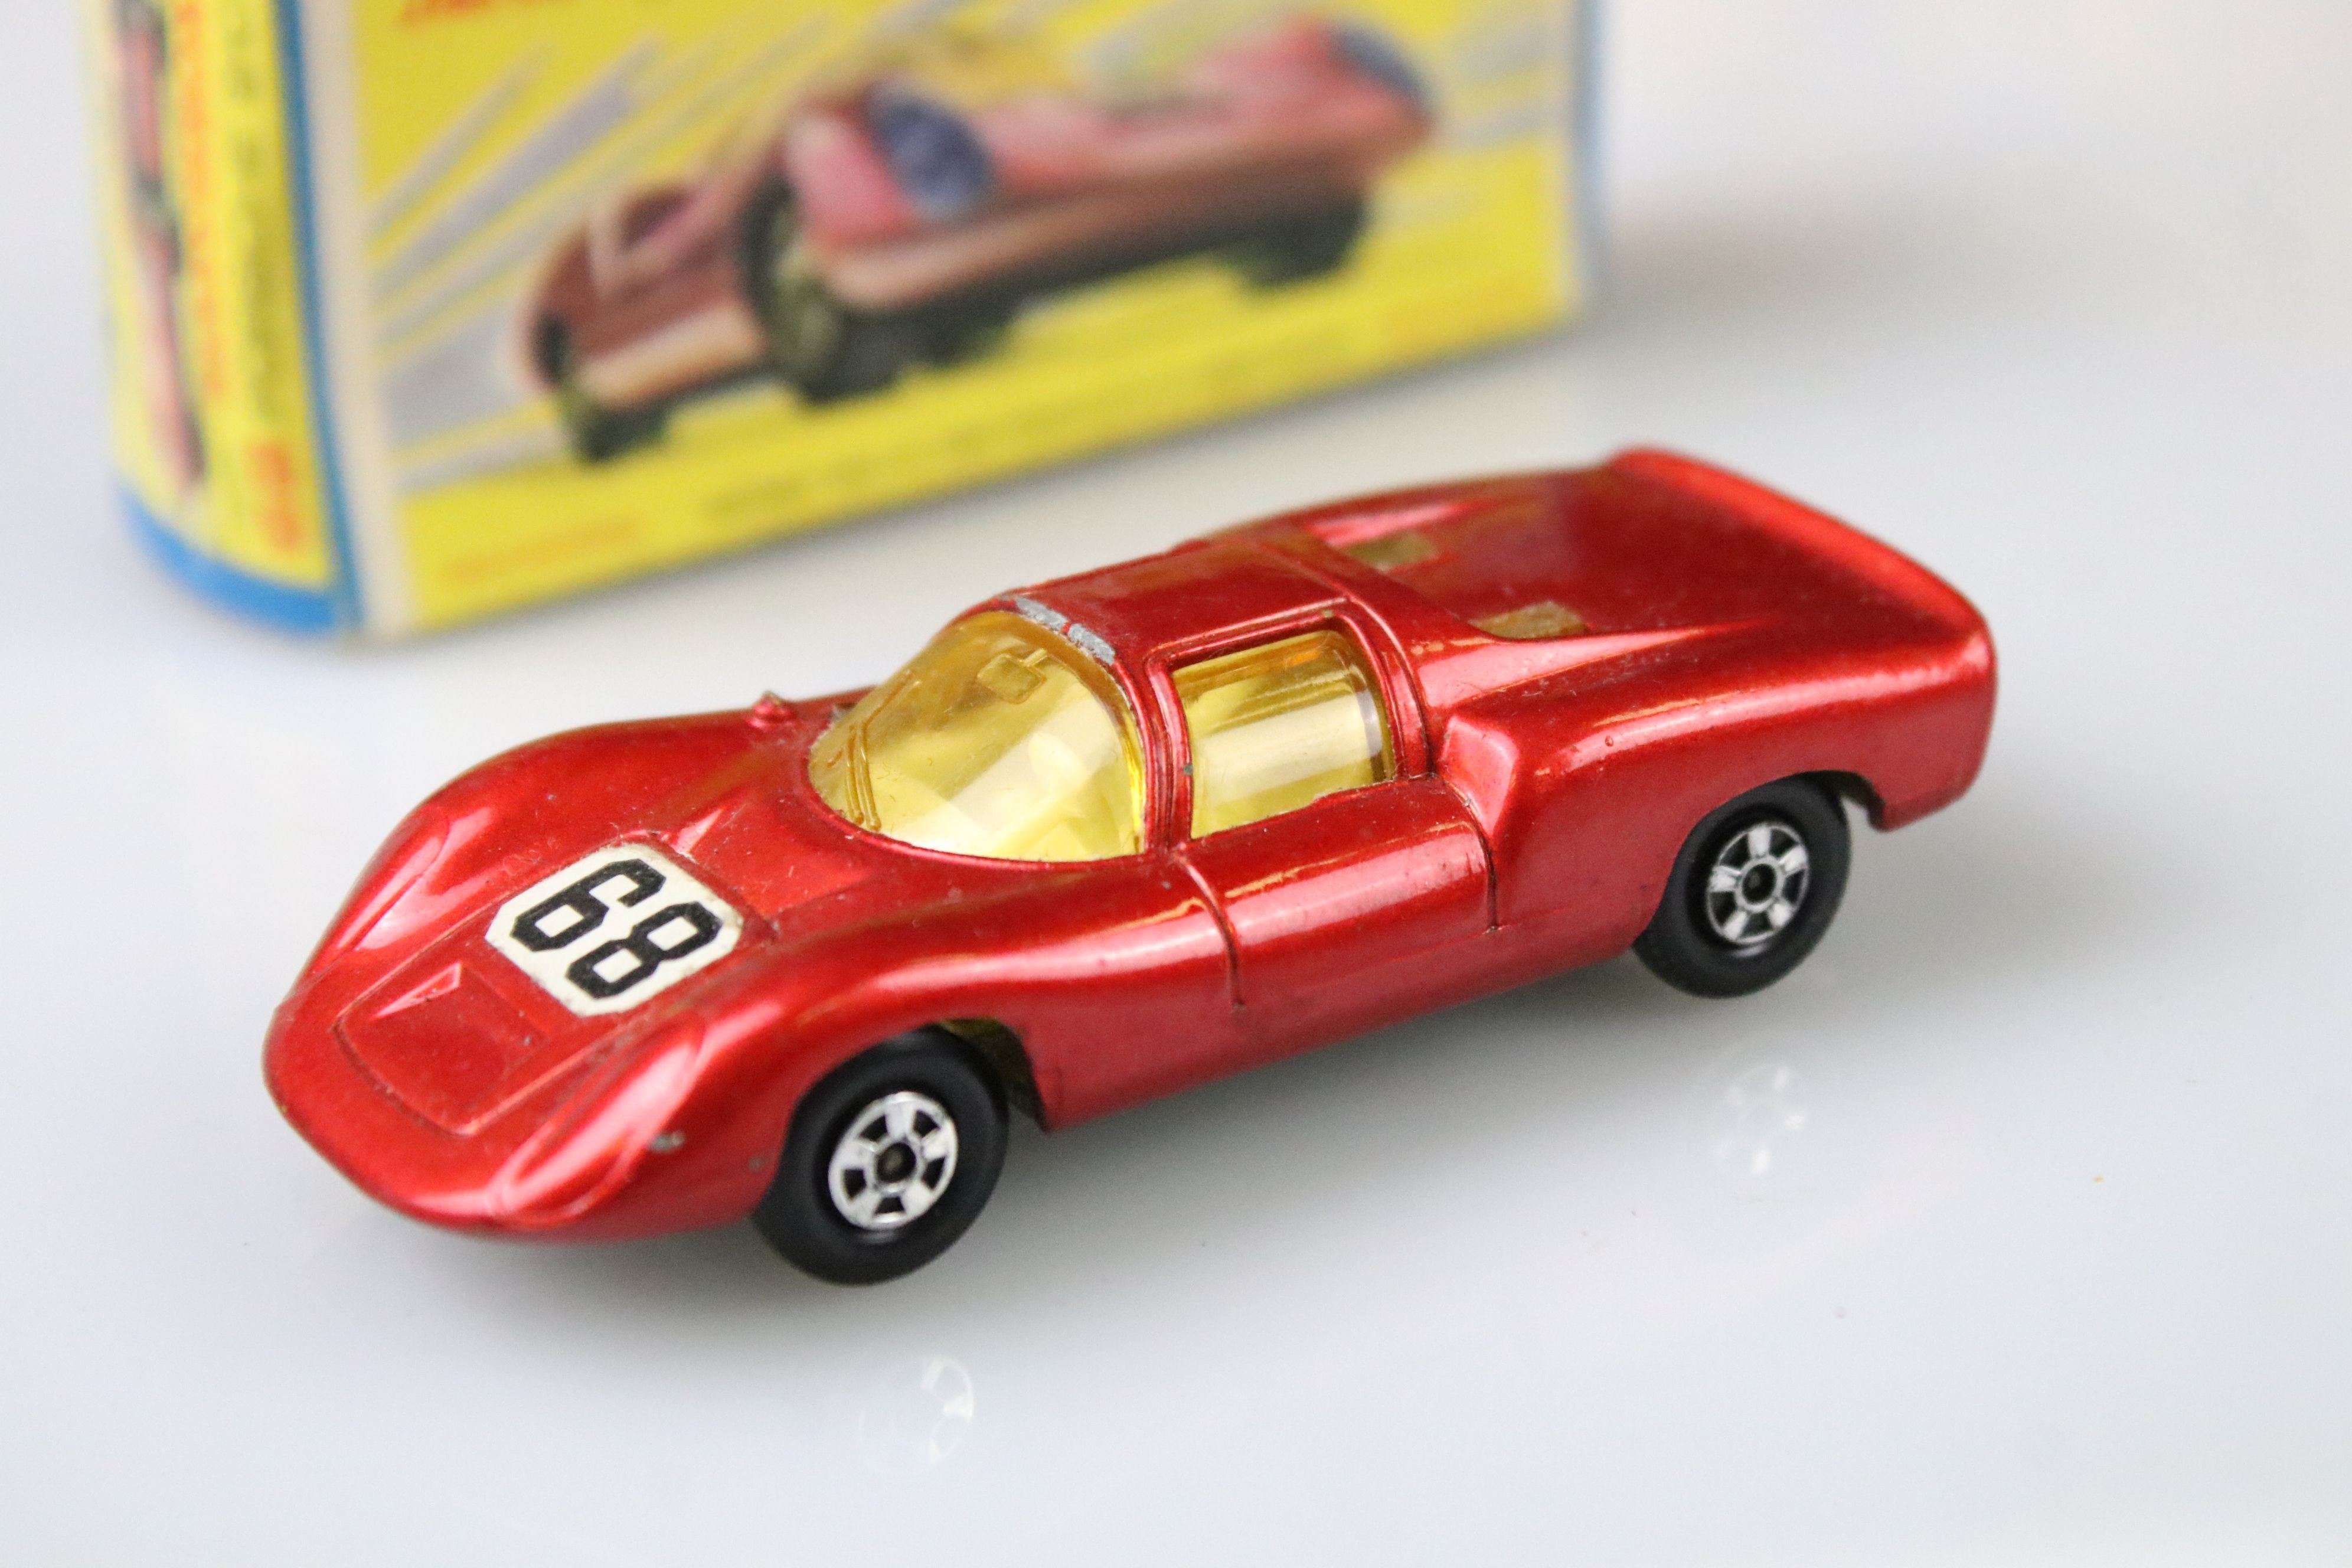 17 Boxed Matchbox Superfast diecast models to include 41 Ford GT, 29 Racing Mini, 57 Landrover - Image 32 of 53